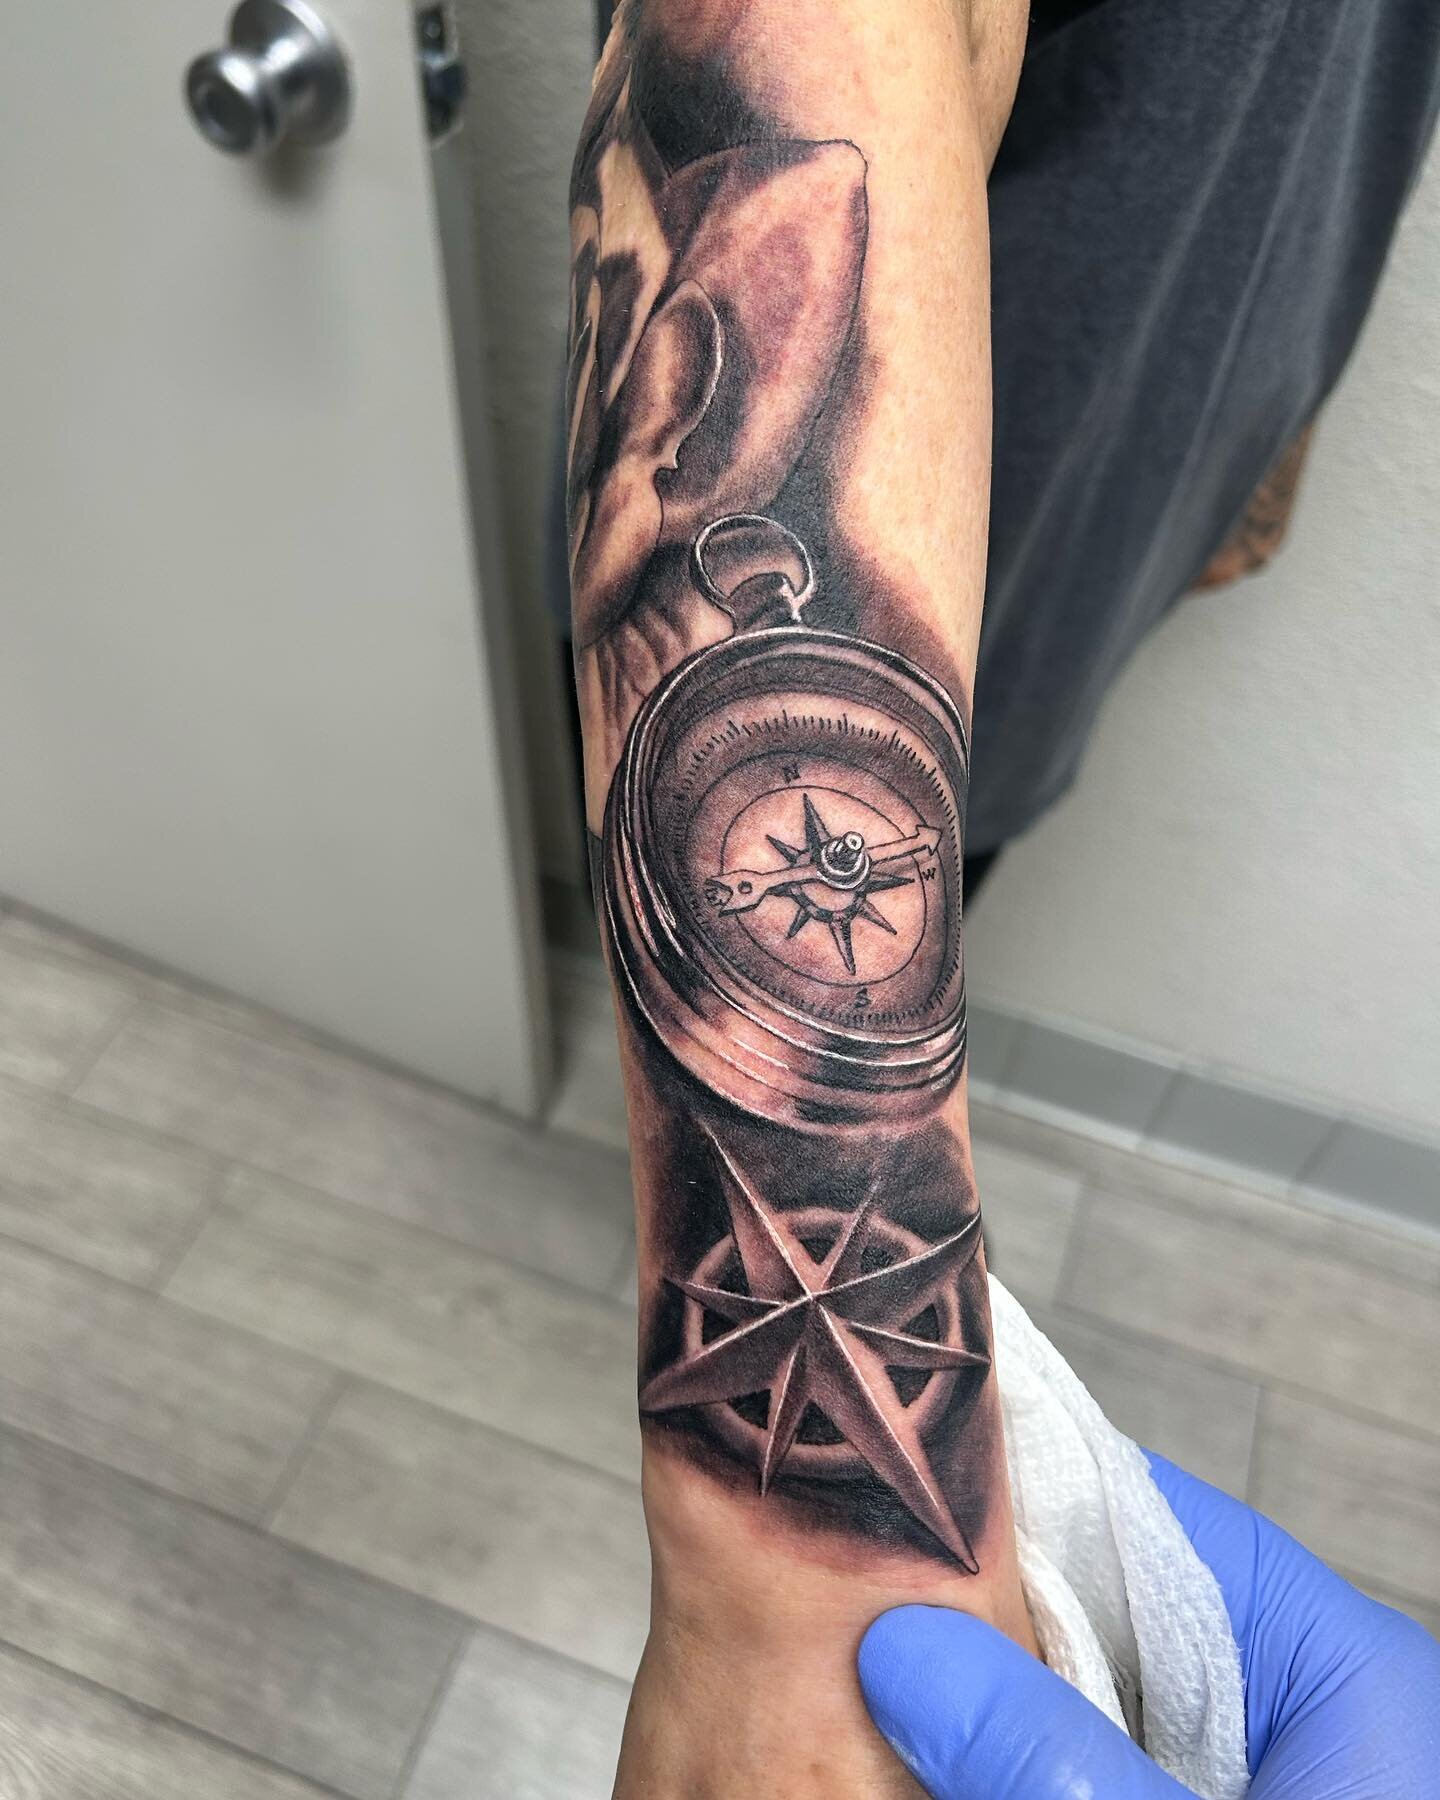 Compass and rose 🌹 added to this sleeve I&rsquo;m working on!! 

Done here @adornmentbodyart Dm or txt (760)993-8455 for appointments!!!

#dripfornia&trade;️💦 #adornmentpiercingprivatetattoo #tattooartist #tat #tattooideas #bng #bnginksociety #bngt